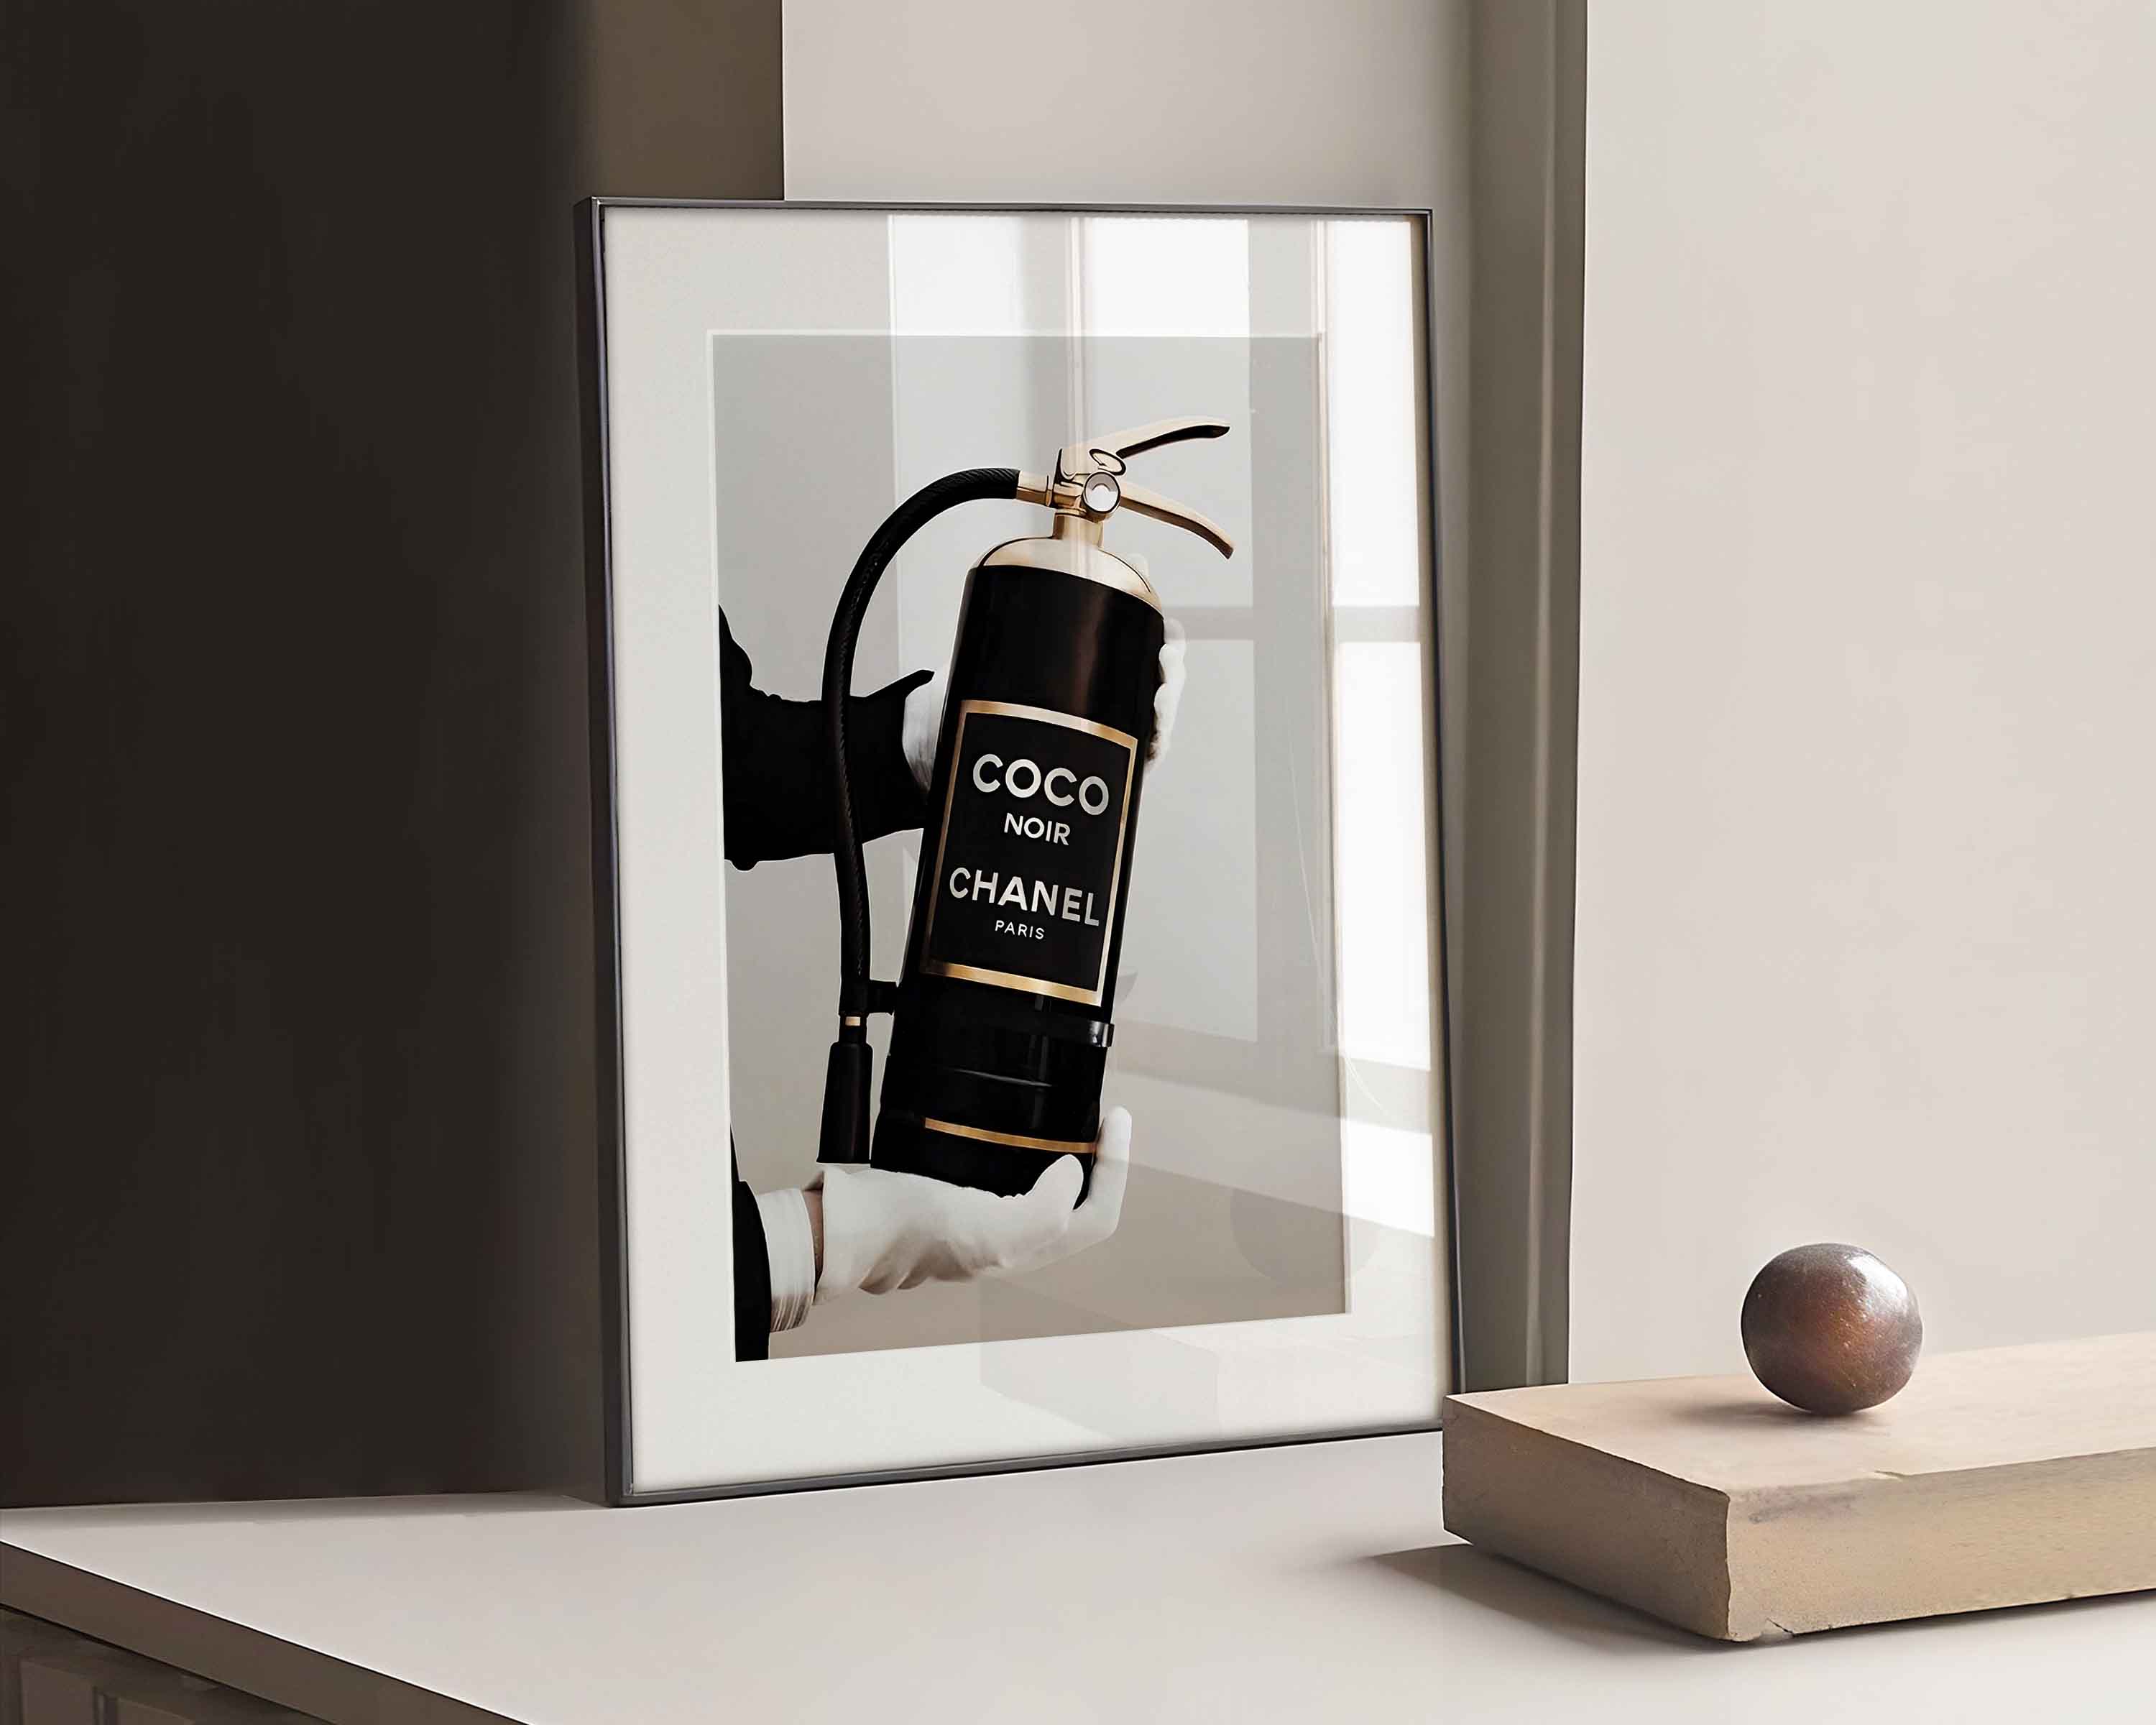 Black and white photography print of Coco Chanel fire extinguisher